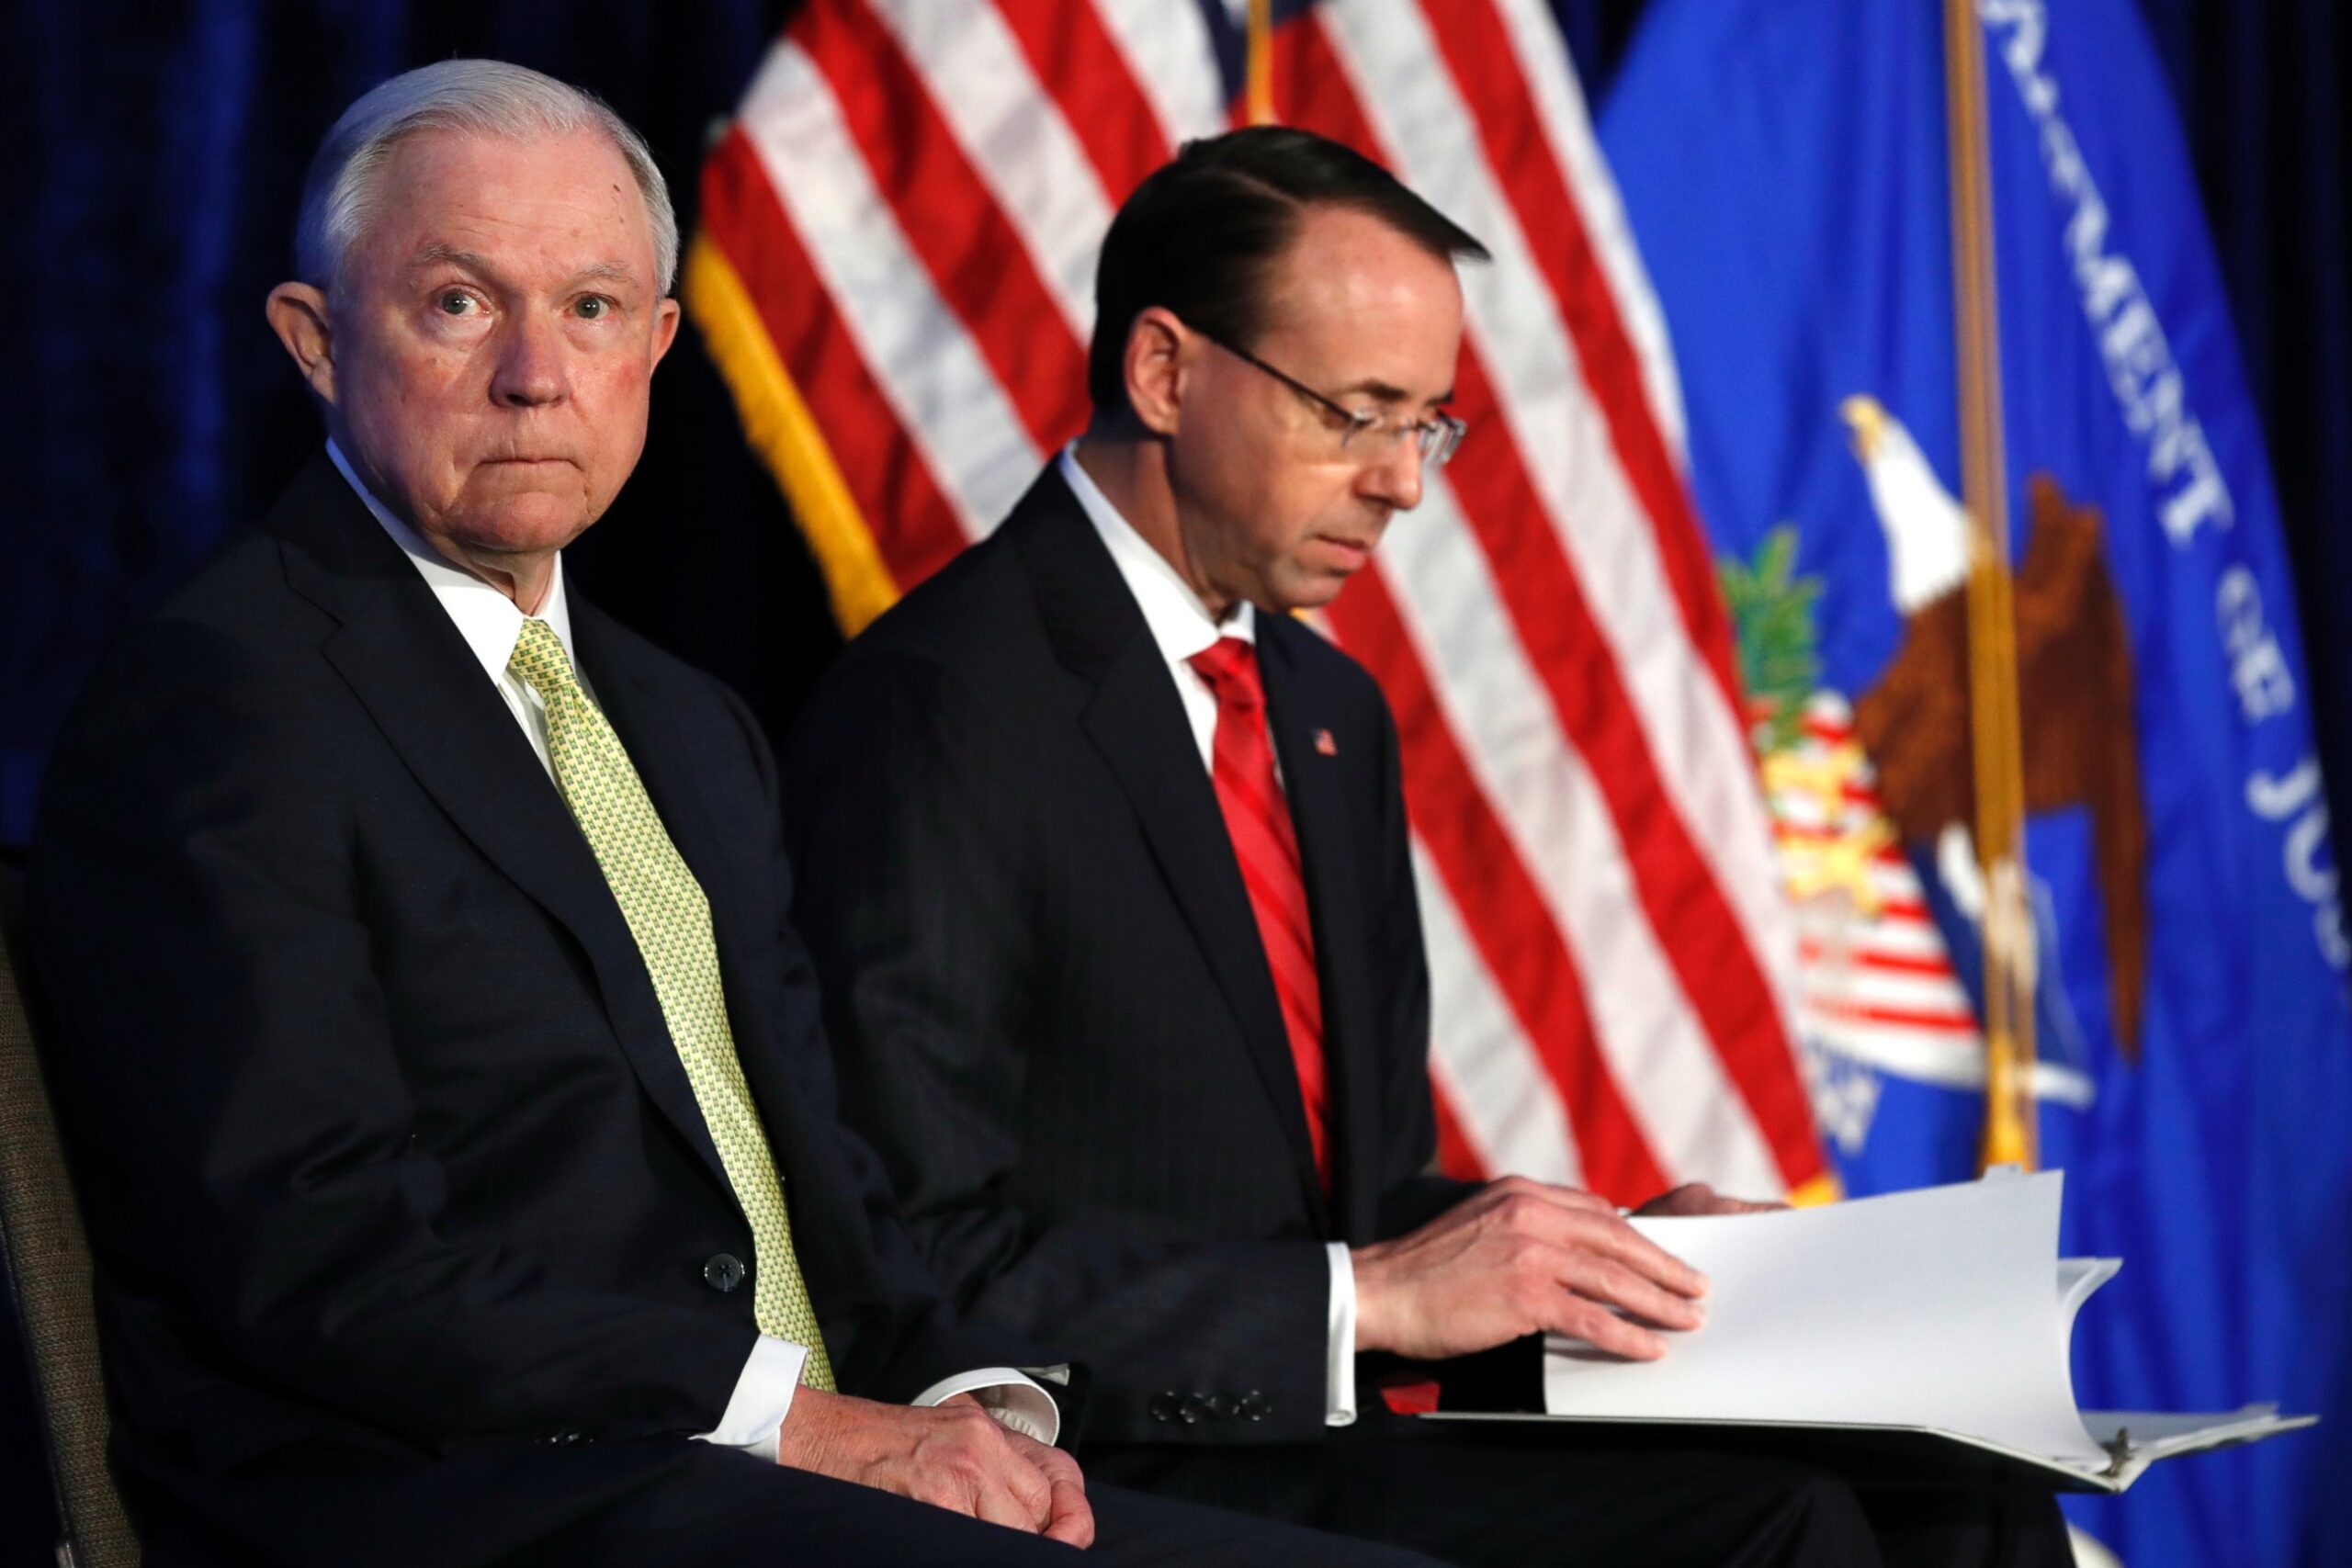 Jeff Sessions Recused from Online Gambling Matters after Hiring Adelson Lobbyist as Personal Attorney in Russia Probe